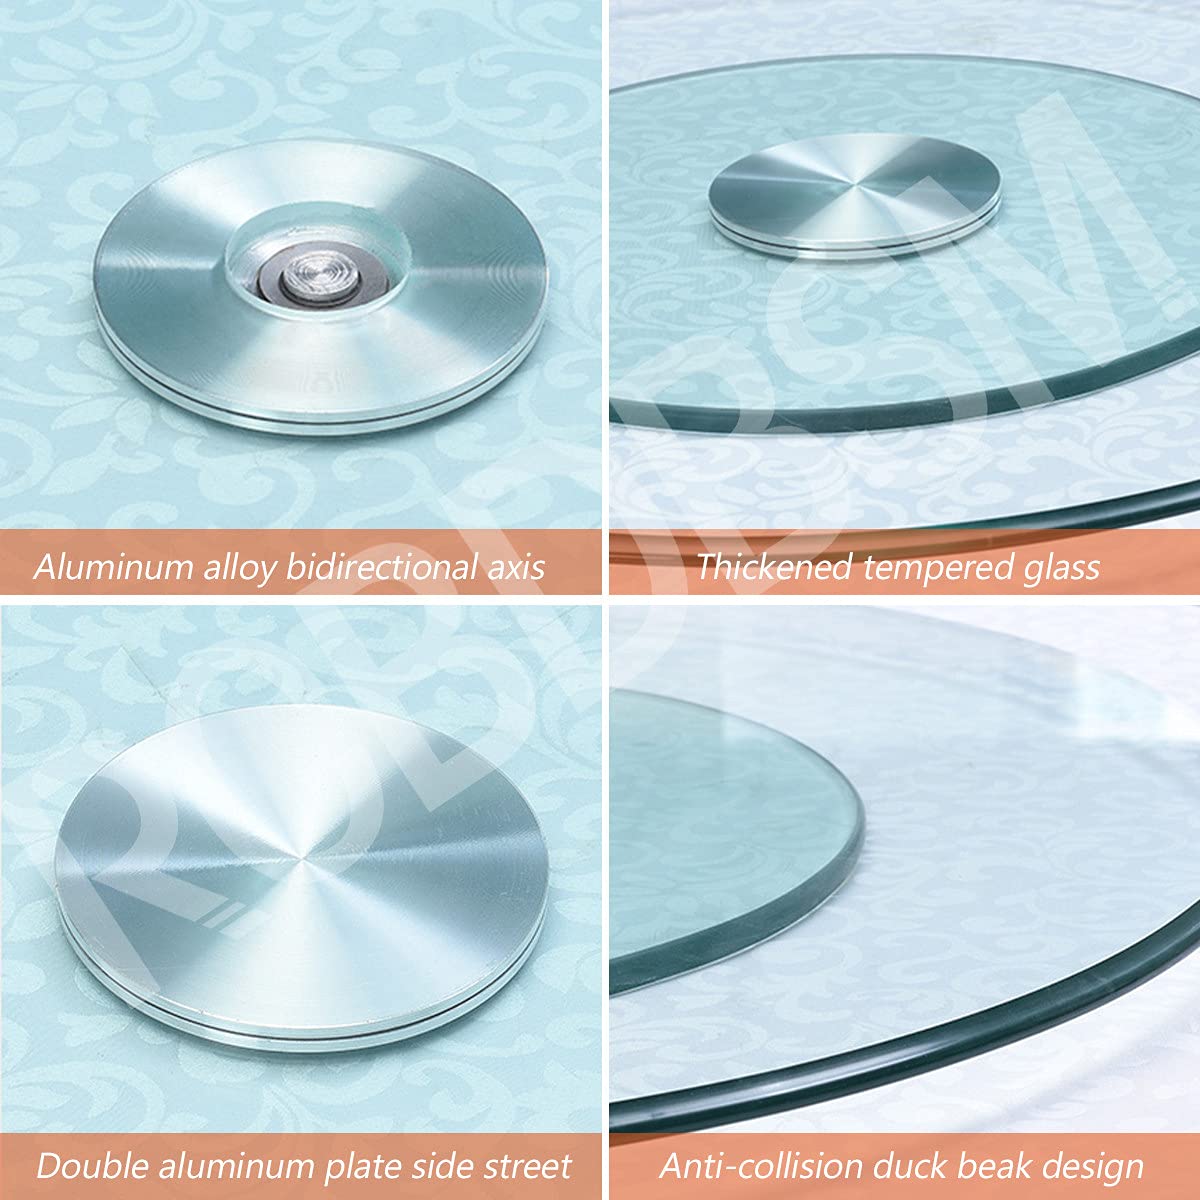 60-120cm/24-47 inch Round Lazy Susan Glass Turntable, Large Rotating Swivel Tray, Round Turntable Countertop, for Kitchen, Restaurant, Dining Table, Easy to Share All Food,60cm/23.6in